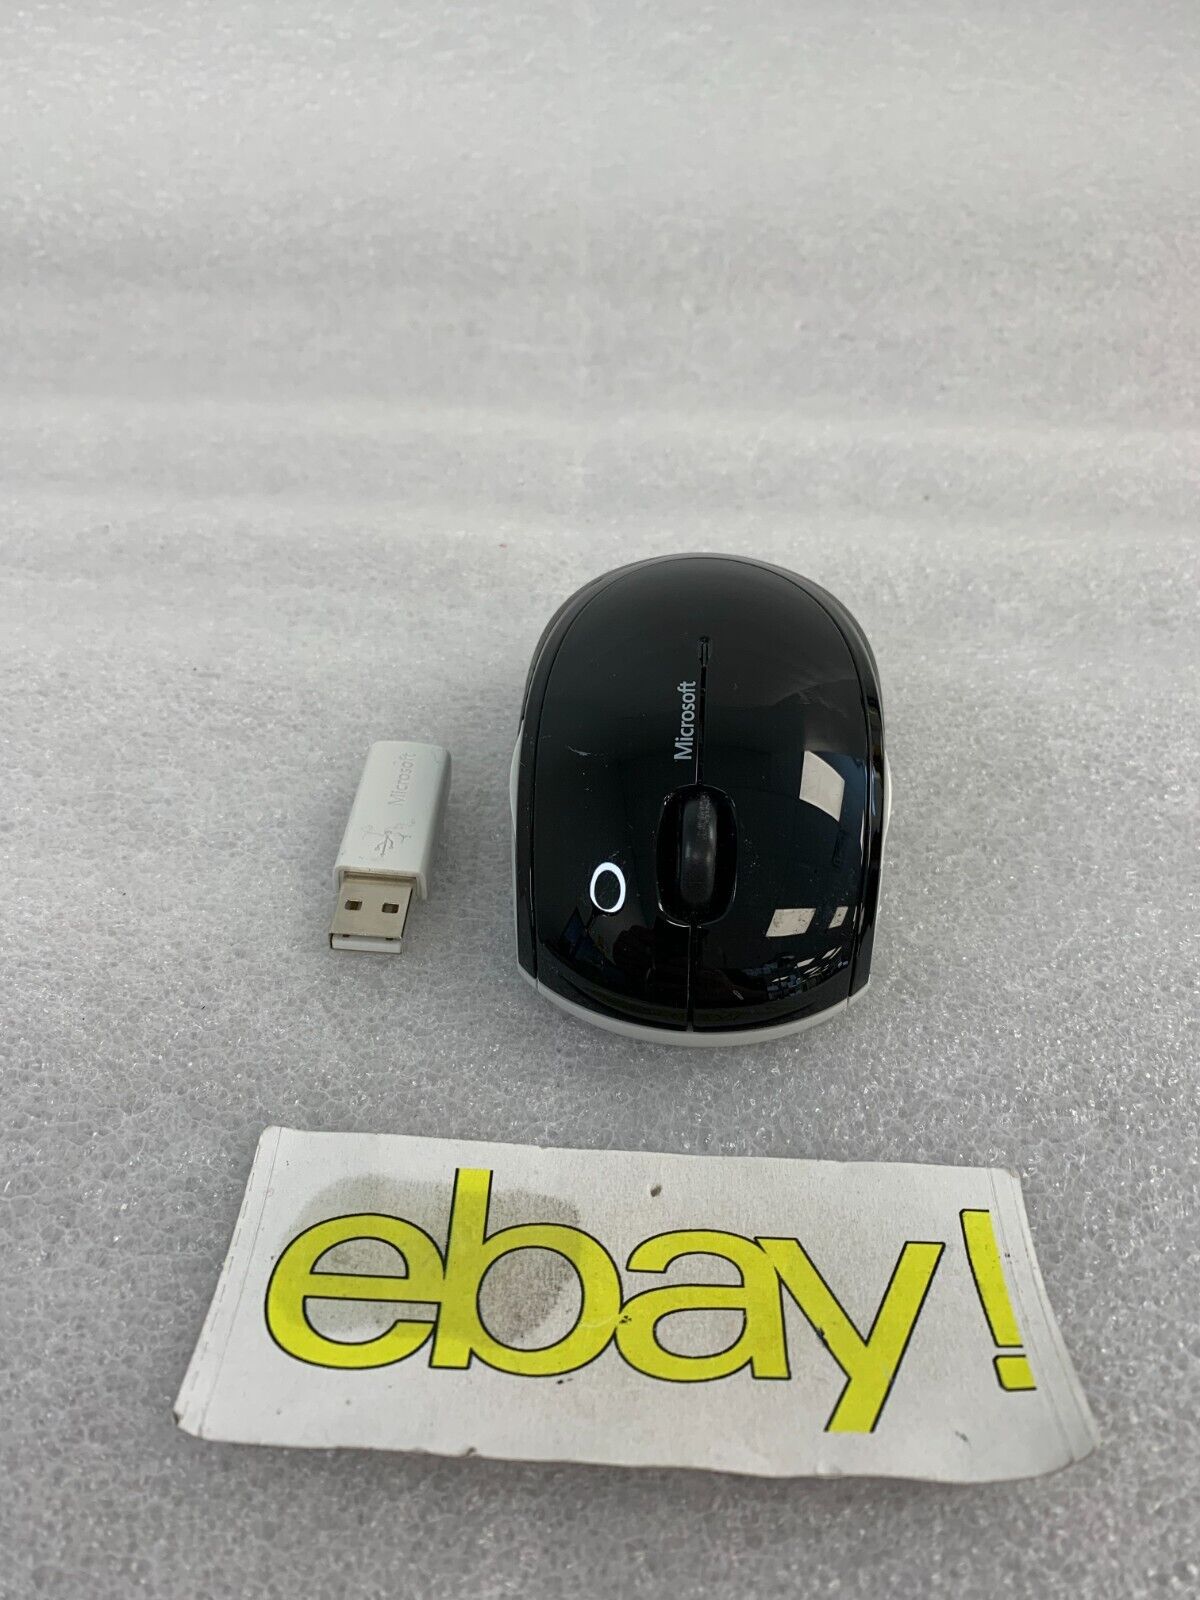 Microsoft Wireless Mouse 5000 MDL 1387 Laser 5-Button w/ USB Dongle 